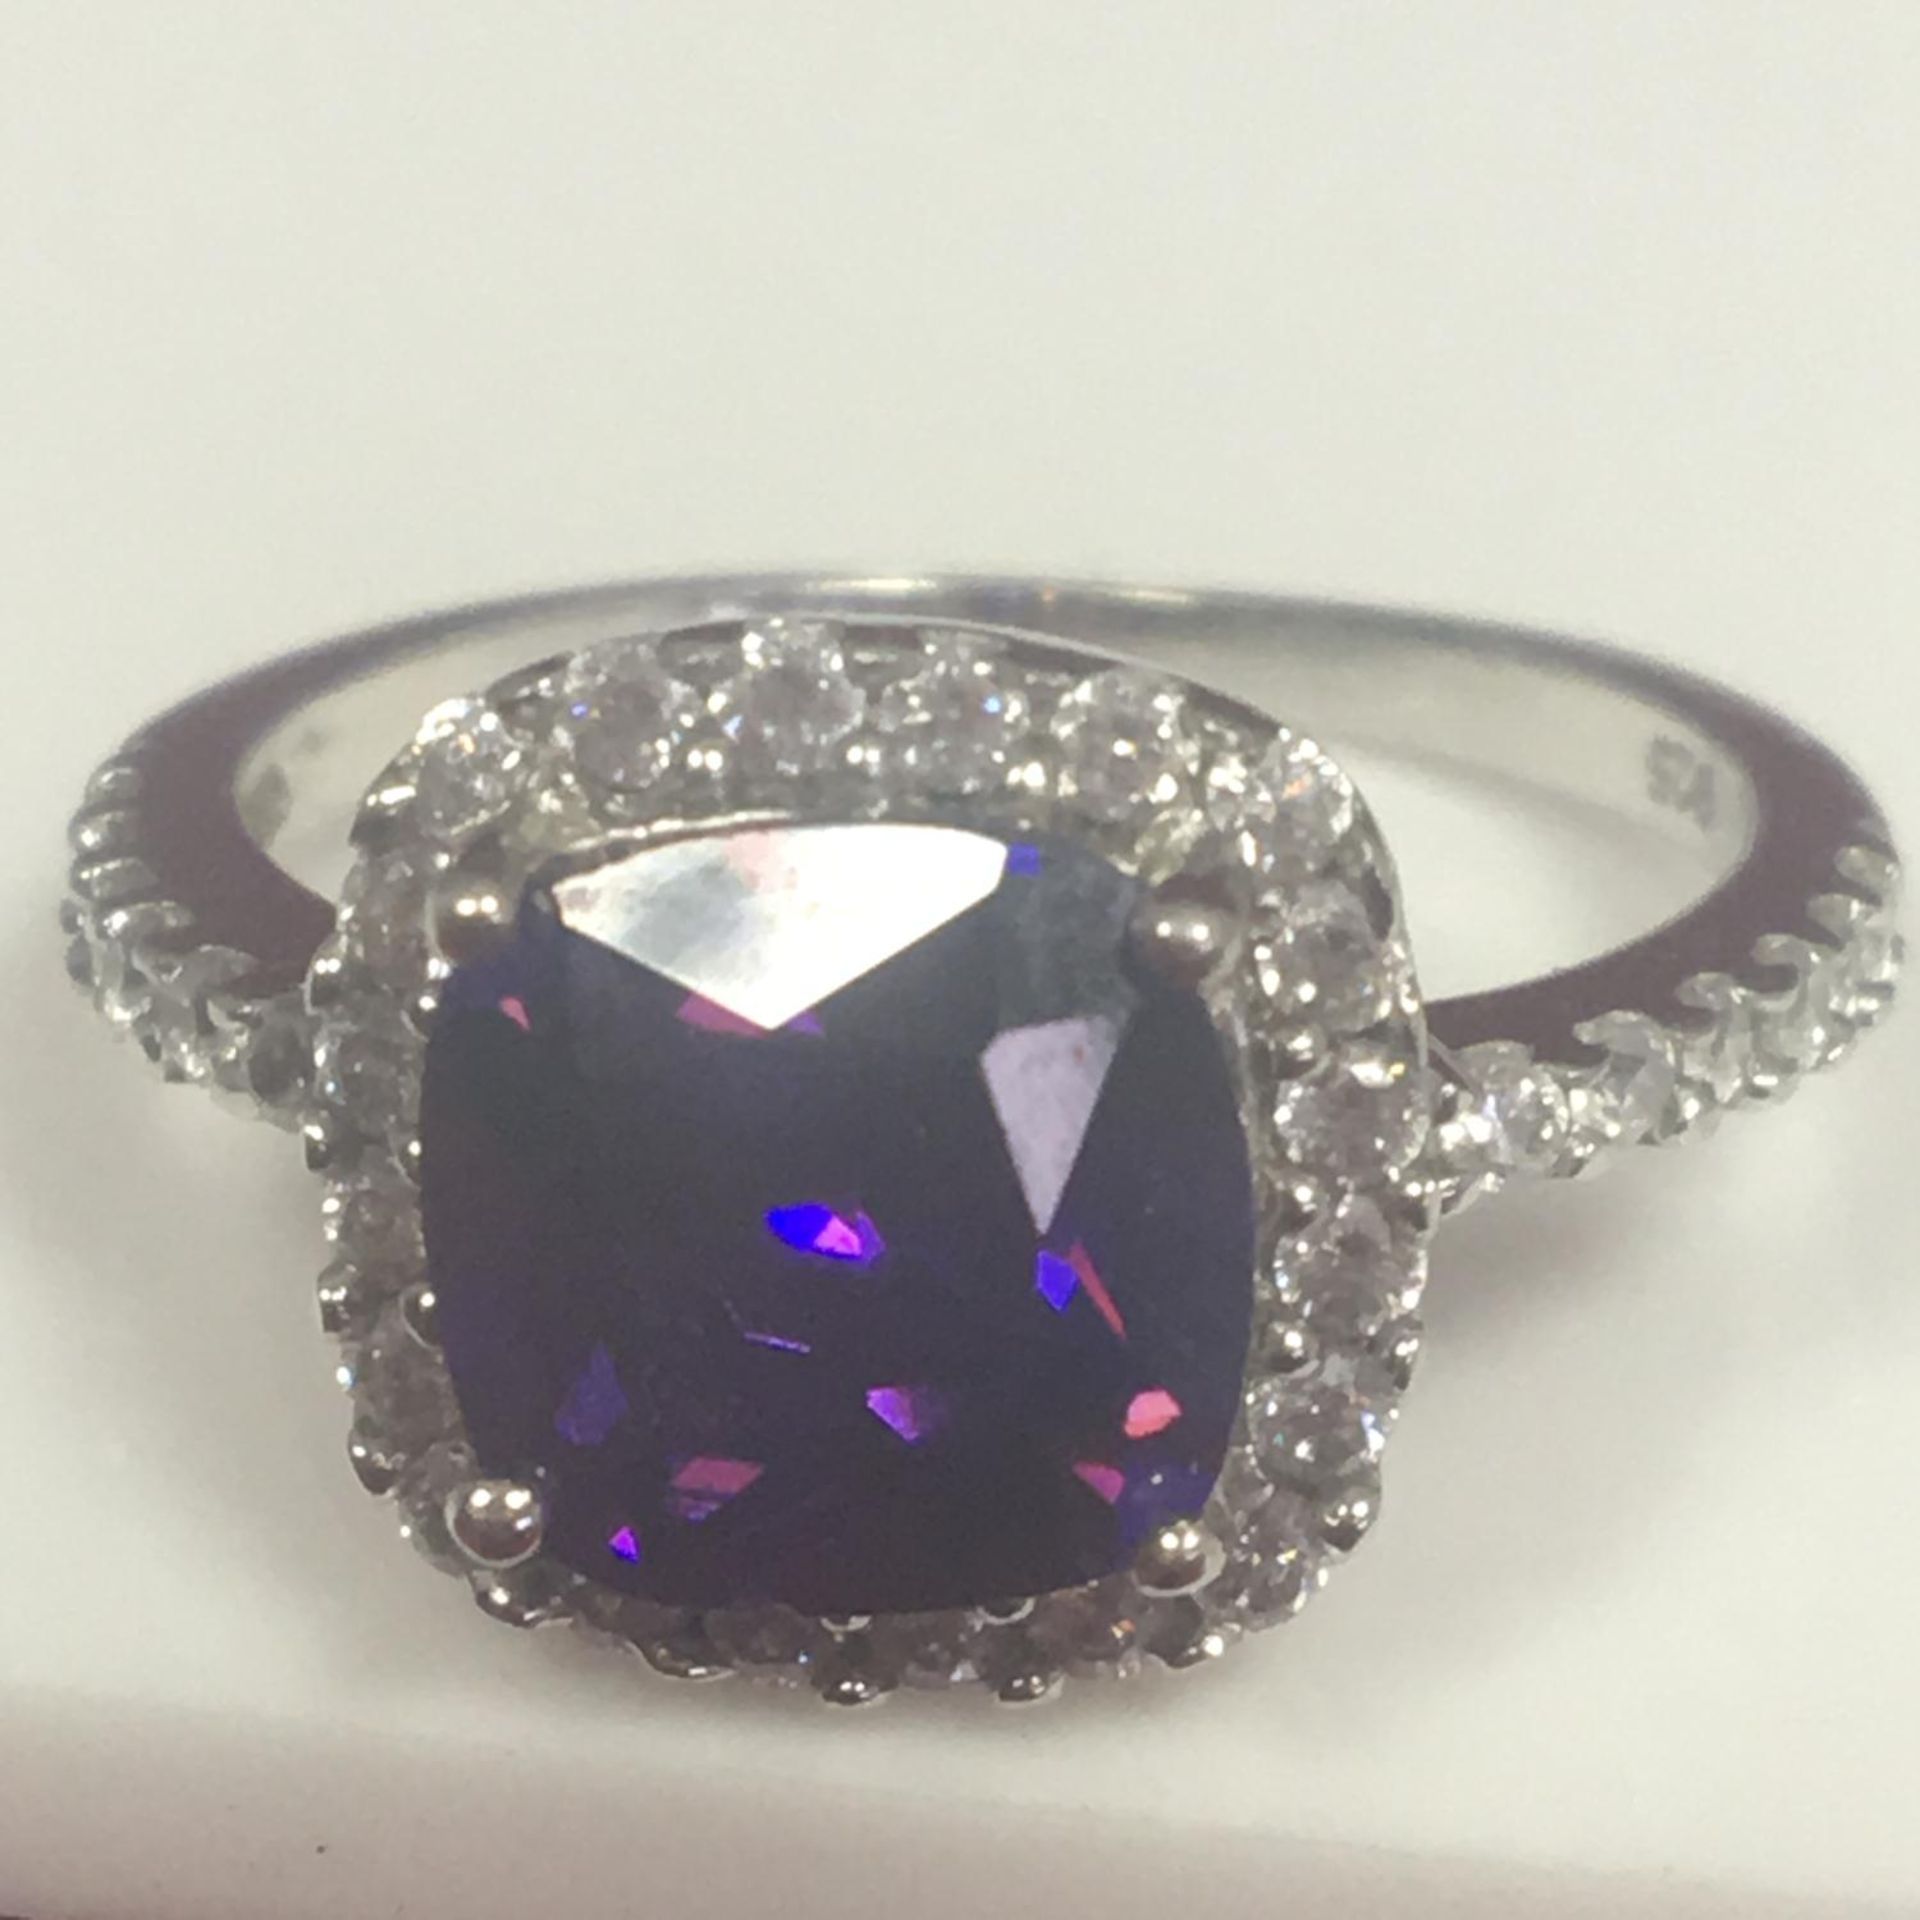 925 silver ring with large purple stone. Size M. Weight 2.9g. The hammer price includes free packing